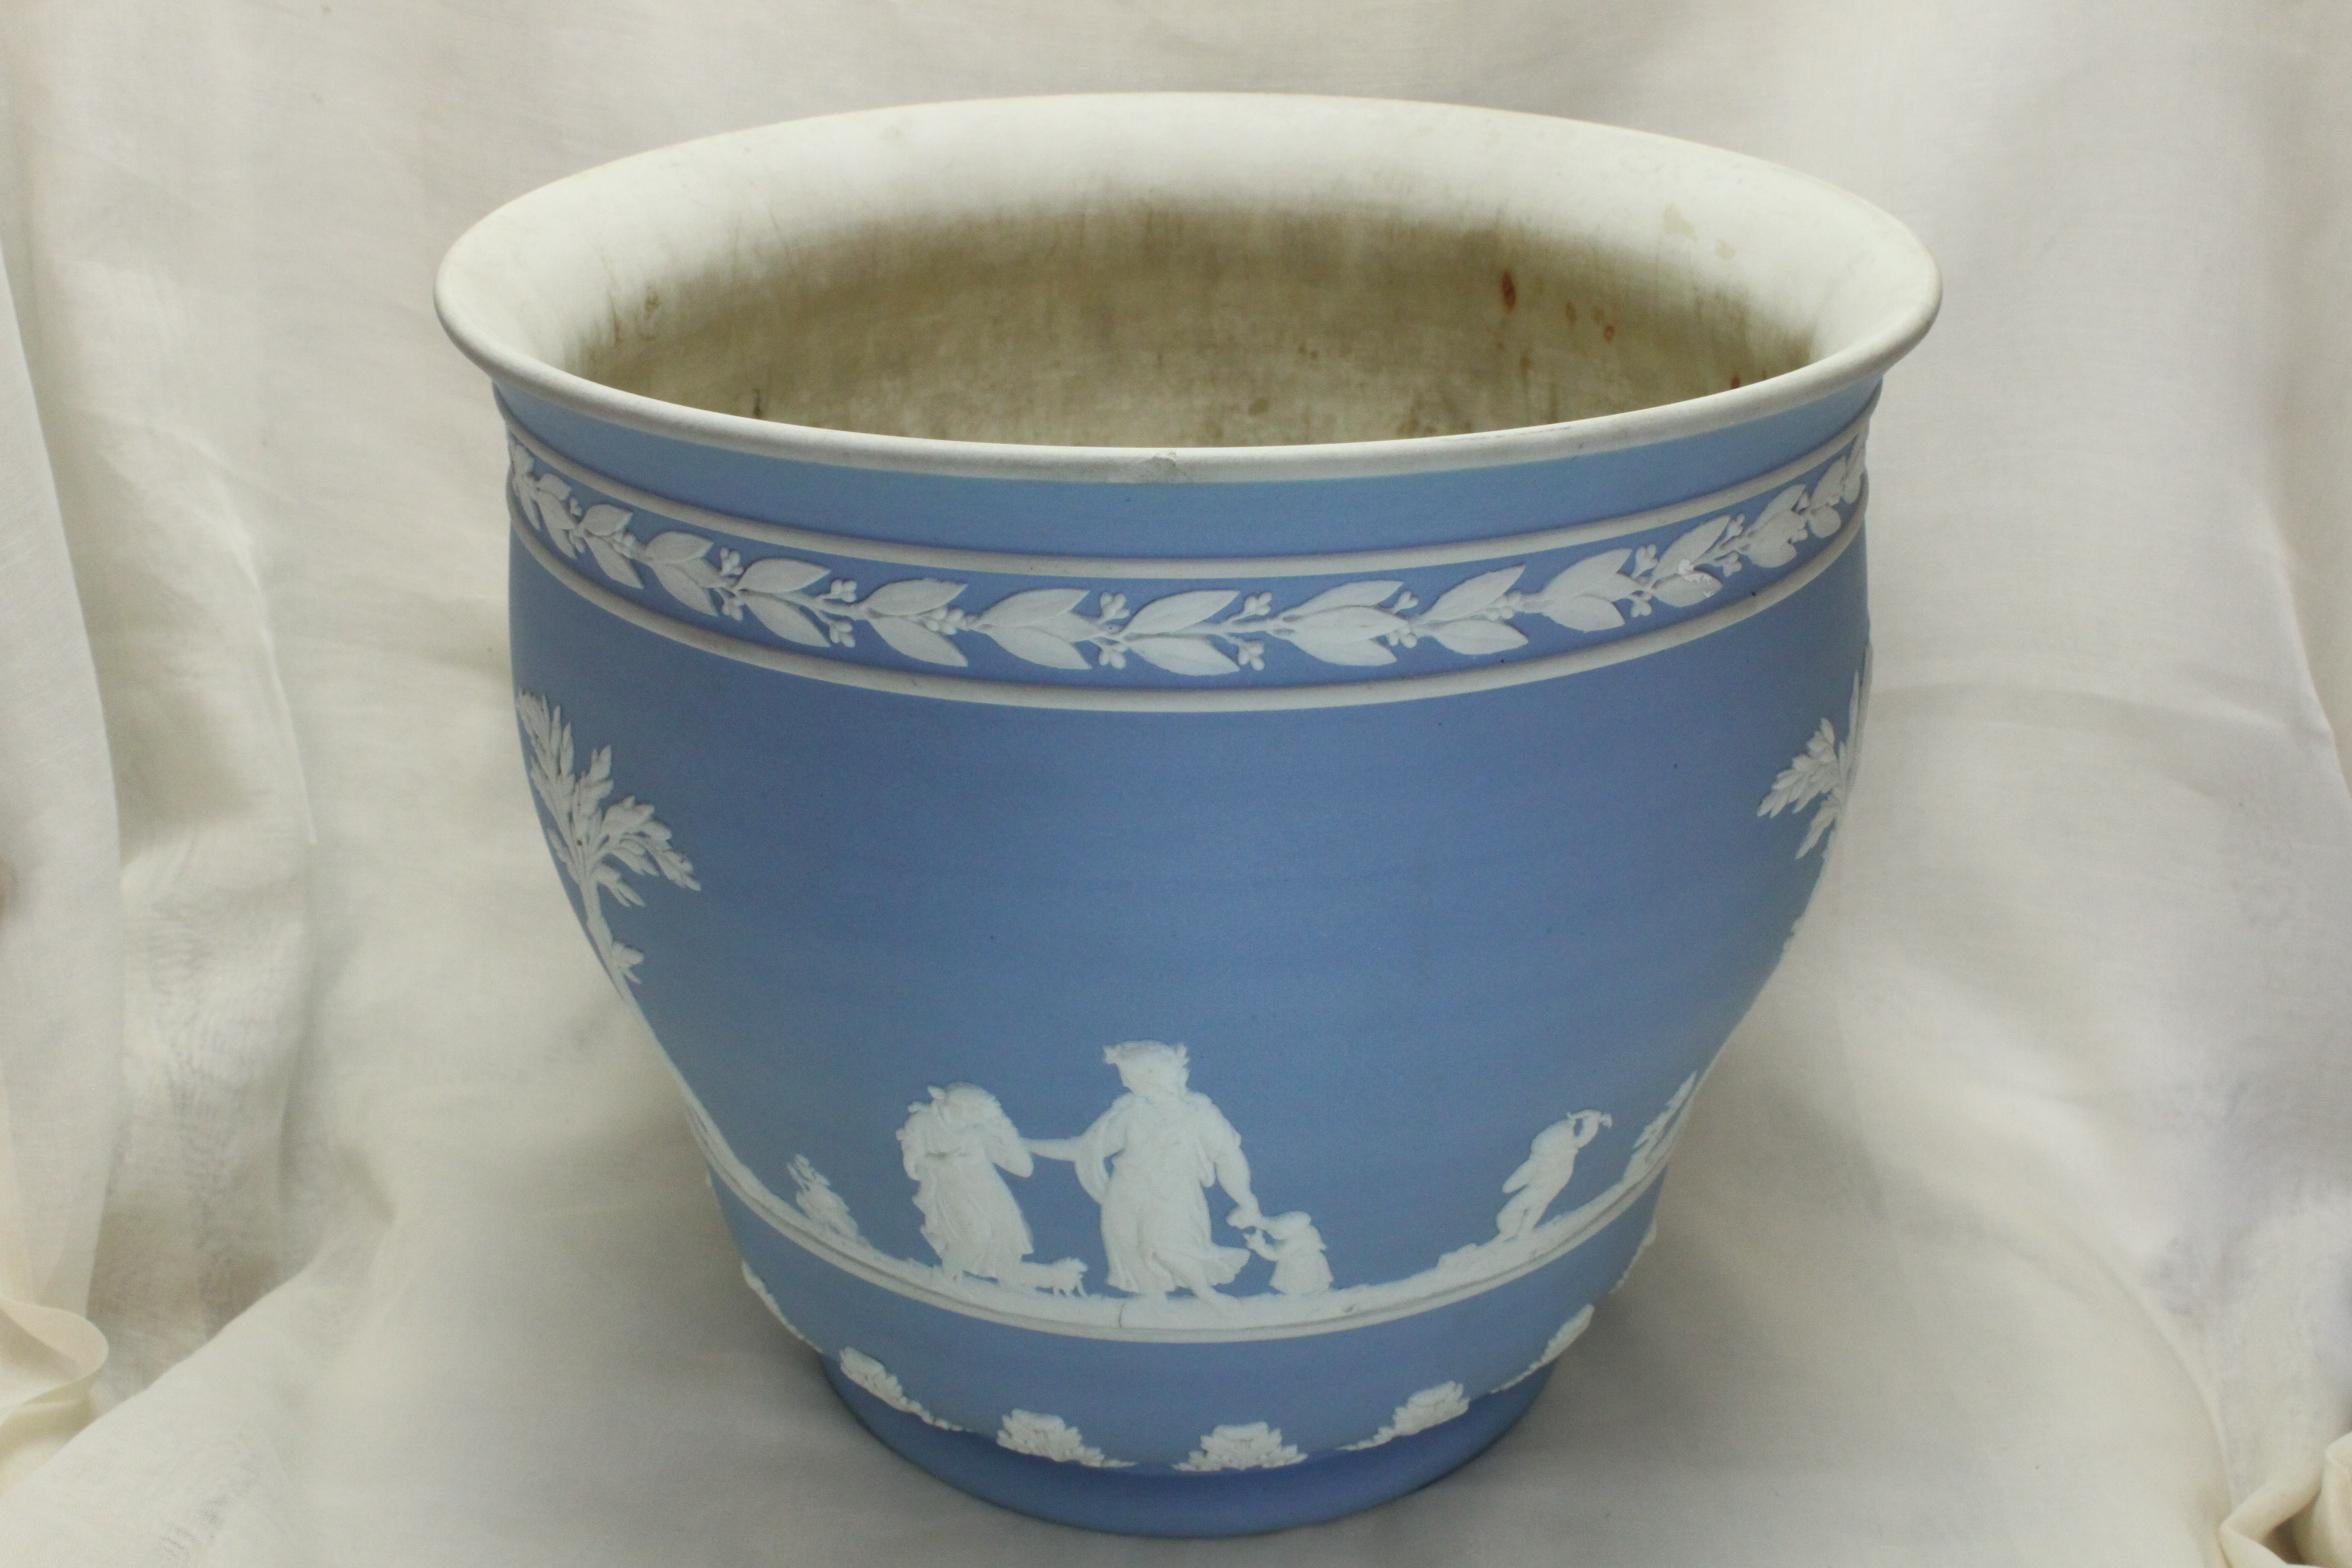 The body of this large Wedgwood jardiniere has been dipped in a light blue Jasperware and decorated with applied sprigs done in a white clay. The sprigs are made when clay is pressed into a very shallow mould, gently teased out, and then carefully